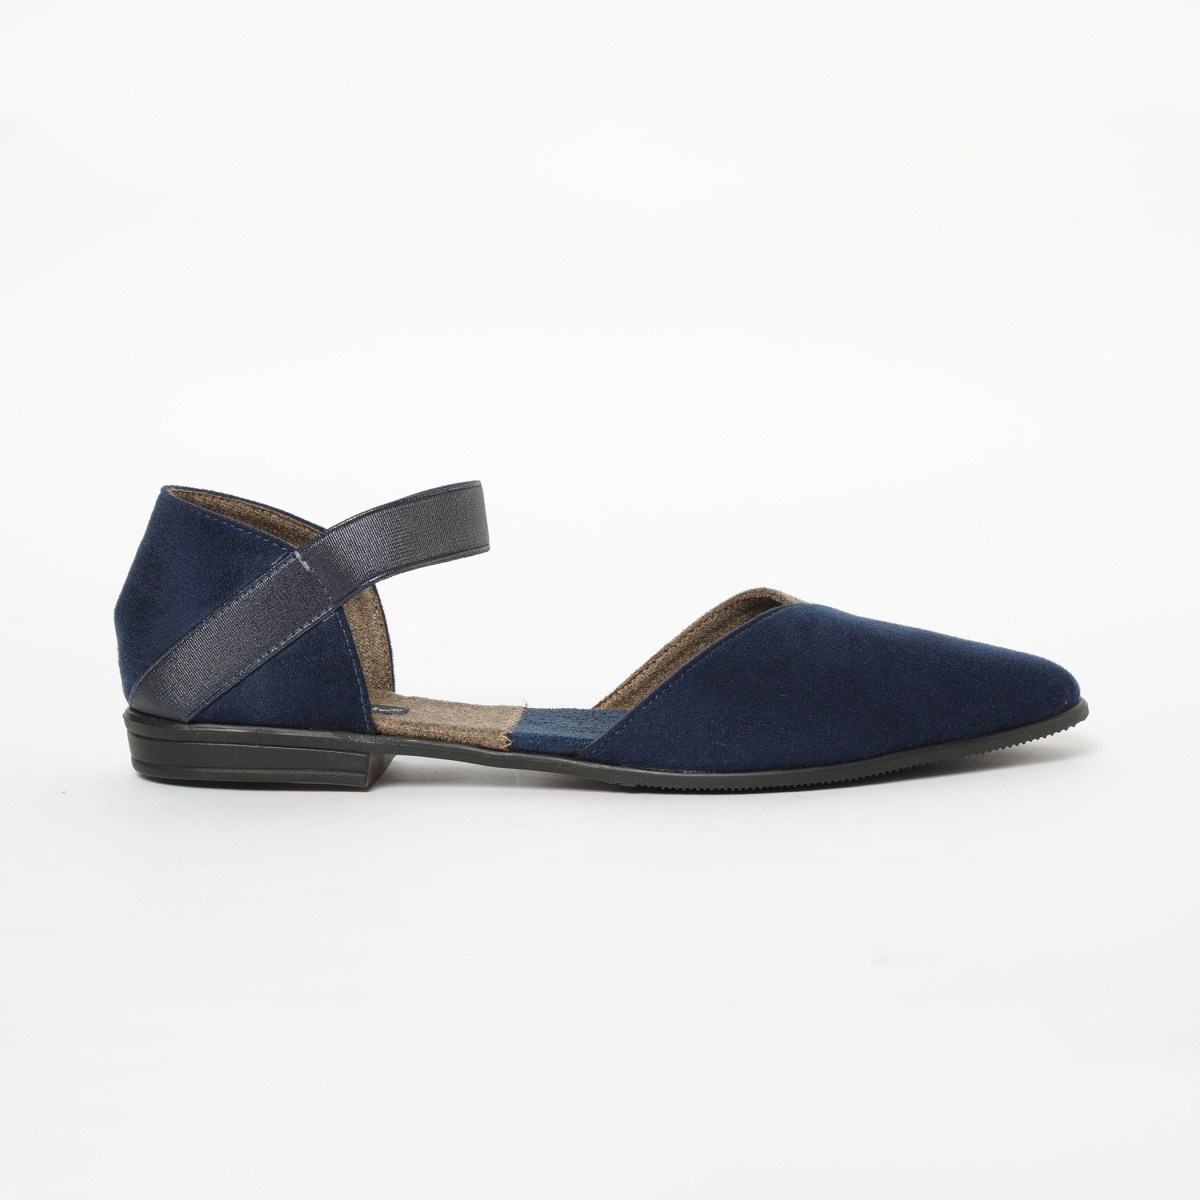 RAW HIDE Colourblock d'Orsays with Ankle Strap